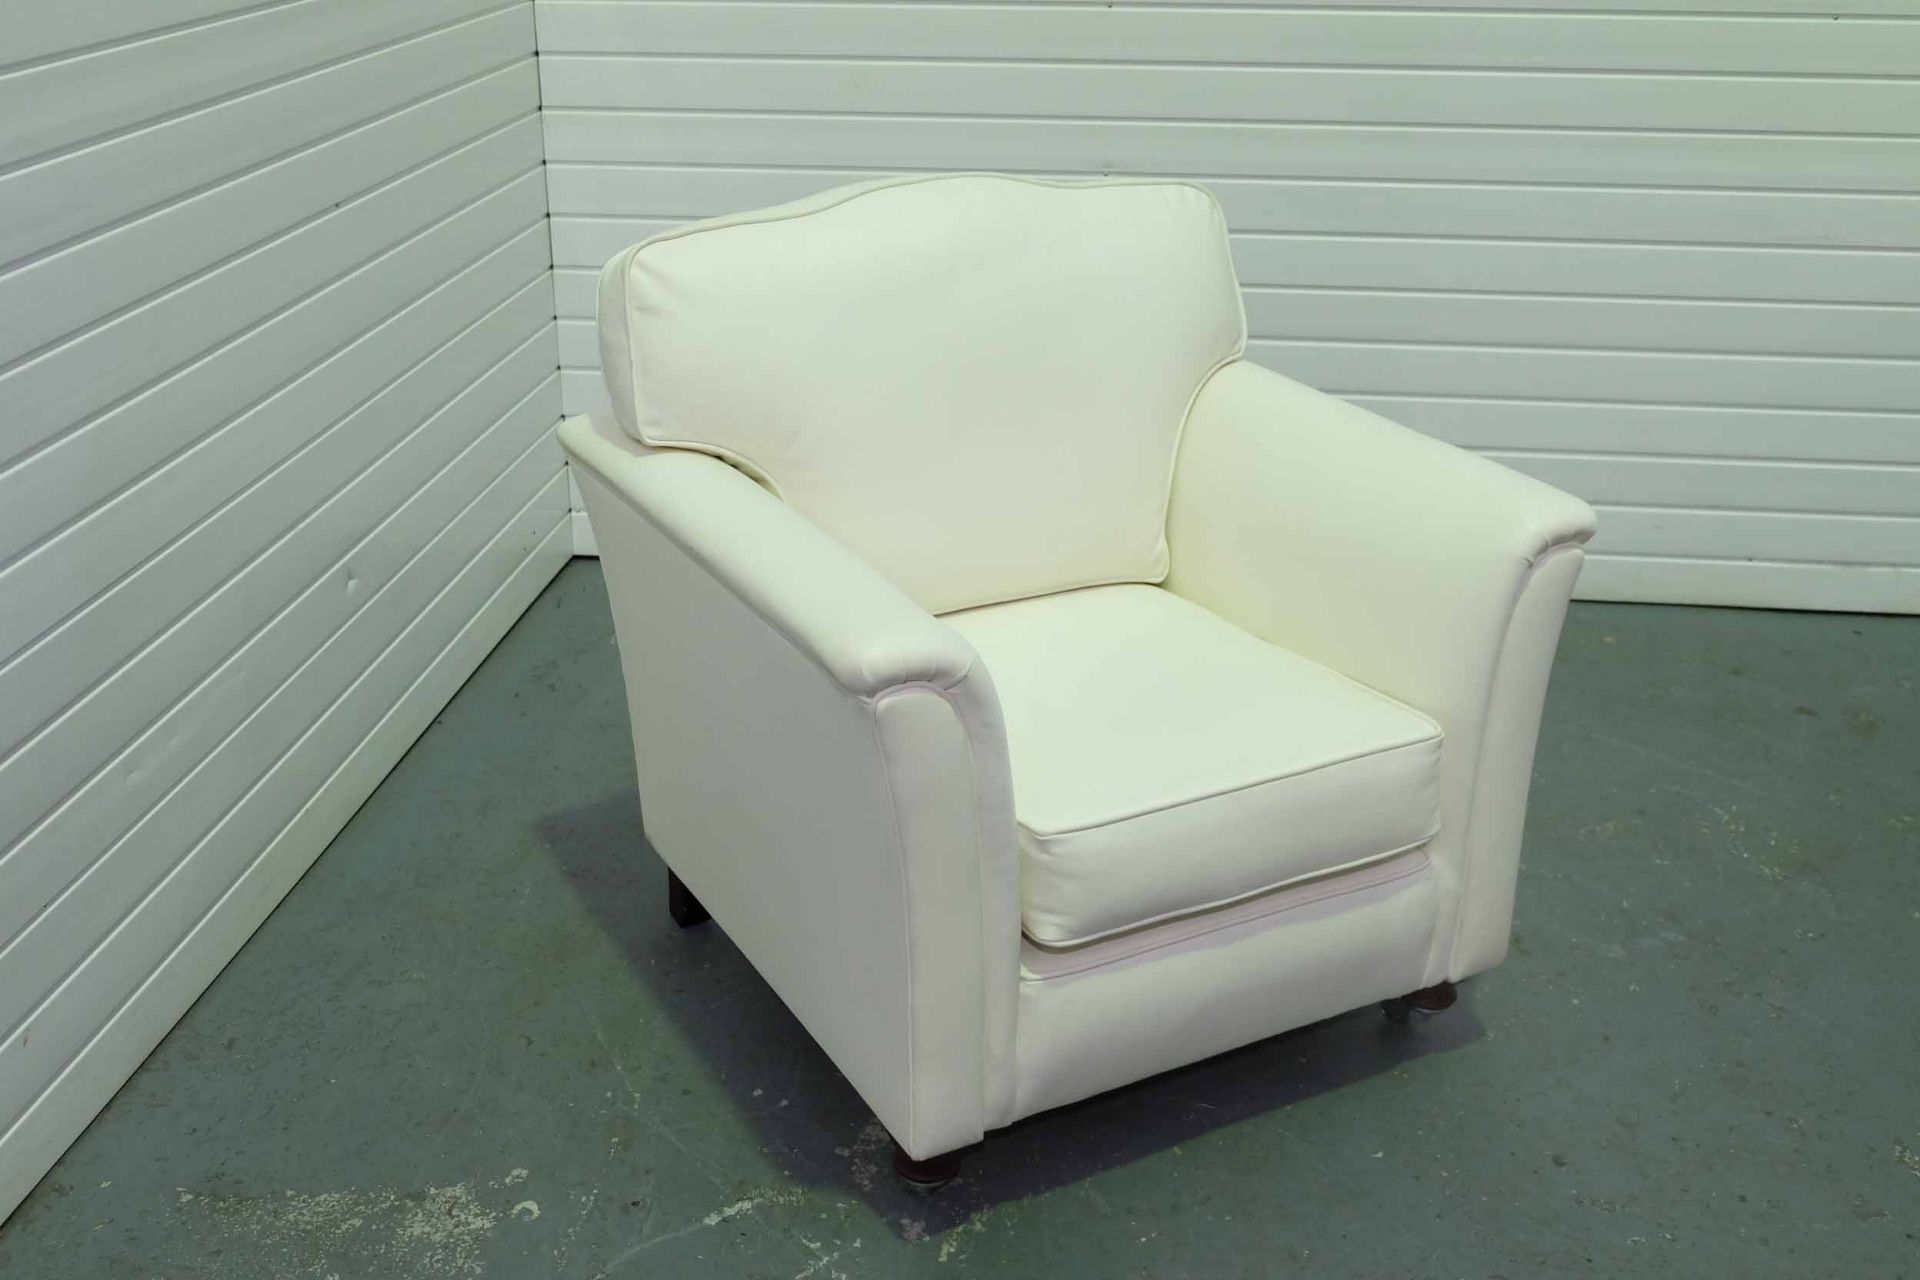 Steed Upholstery 'Exeter' Range Fully Handmade All Leather Chair. With Castor Wheels to the Front of - Image 2 of 2